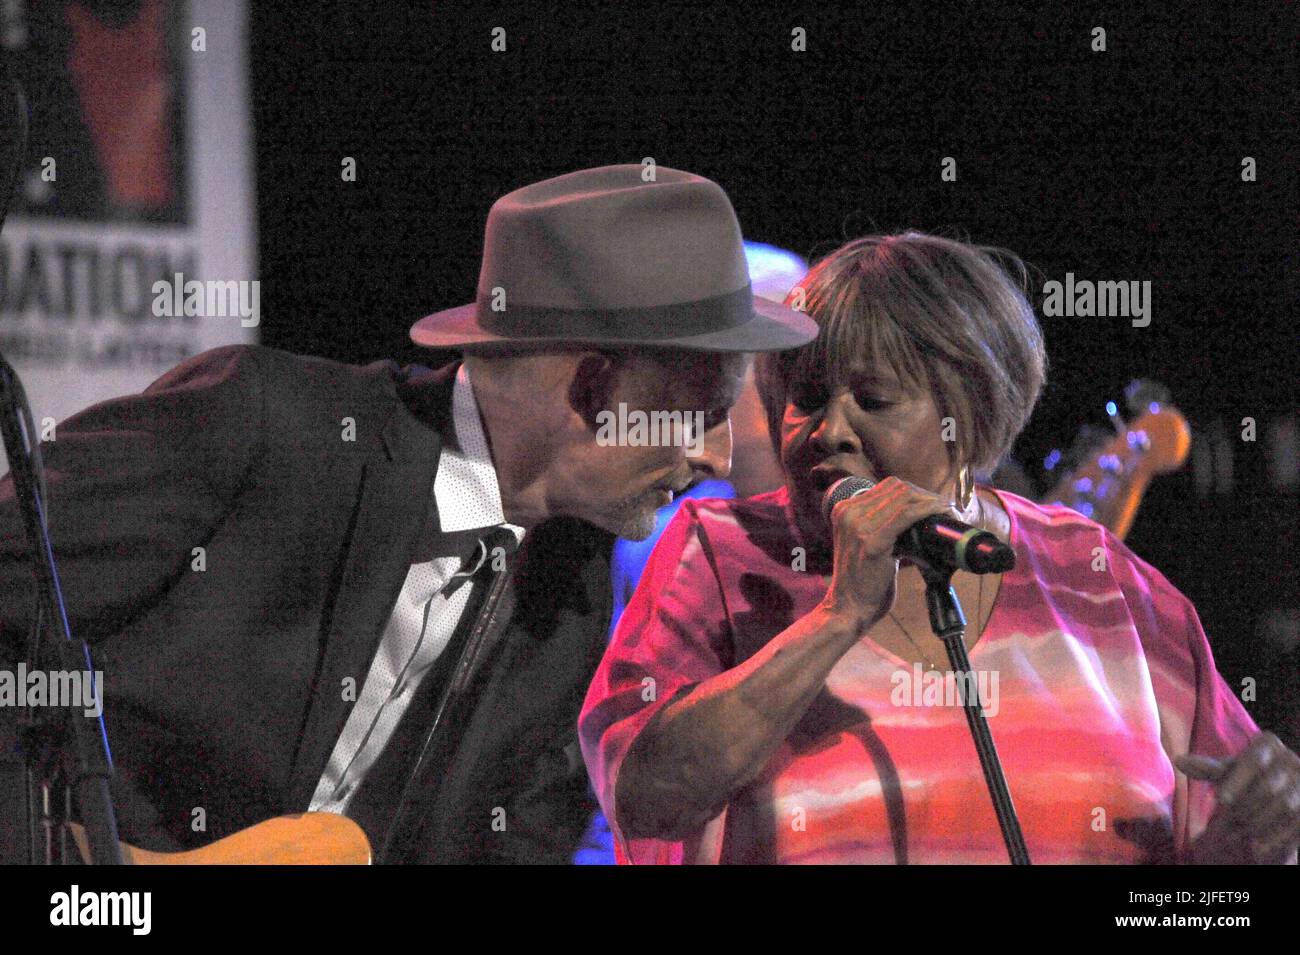 Chicago, IL, USA. 1st July, 2022. Mavis Staples performing at The Metro in Chicago, Illinois on July 1, 2022. Credit: Gene Ambo/Media Punch/Alamy Live News Stock Photo